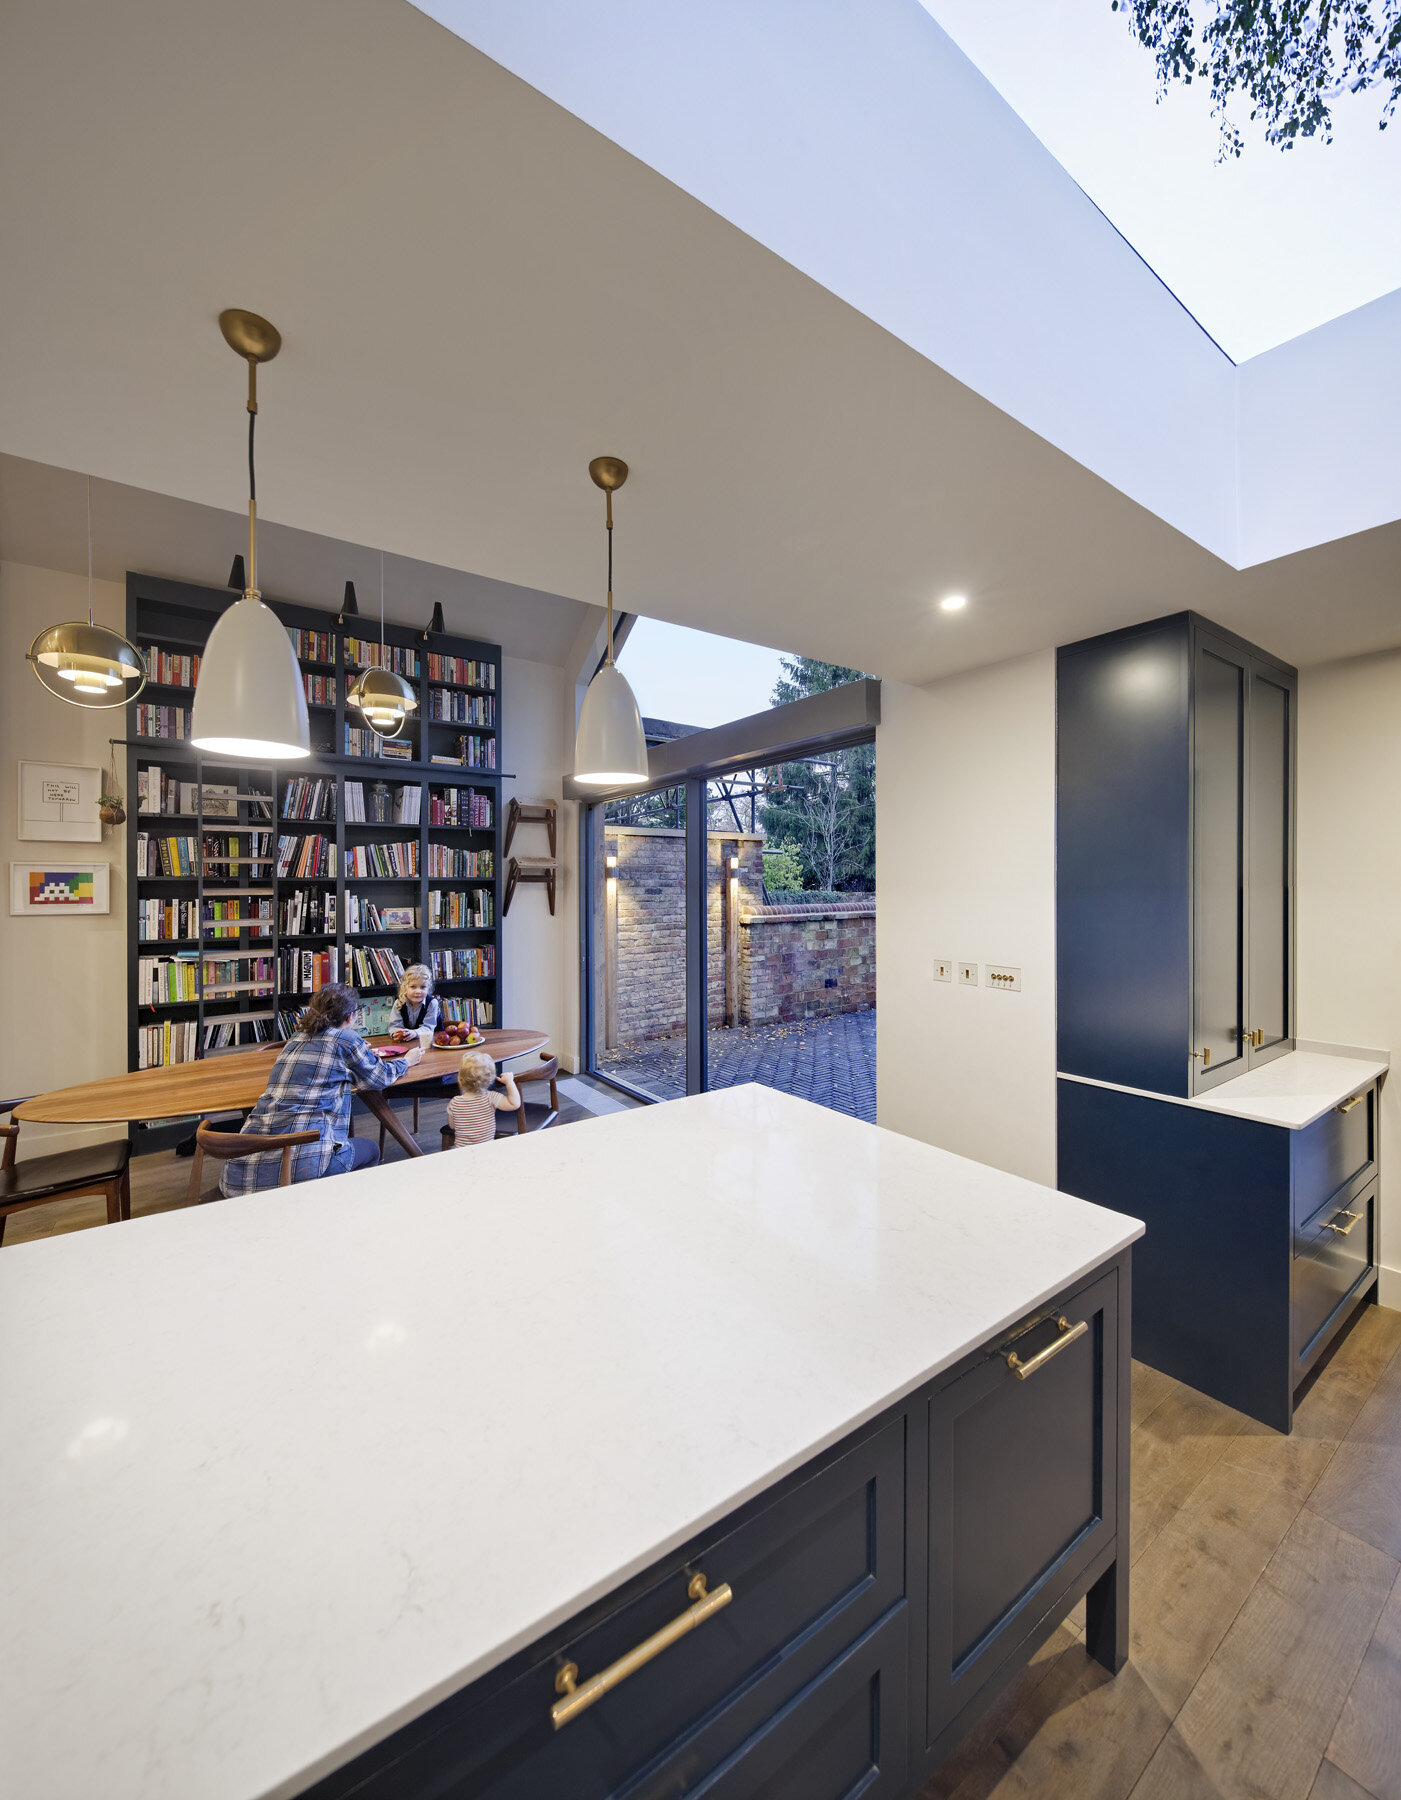  Photography by Dan Paton showcasing the renovation of an Oxford townhouse by BGS Architects of Oxford. 